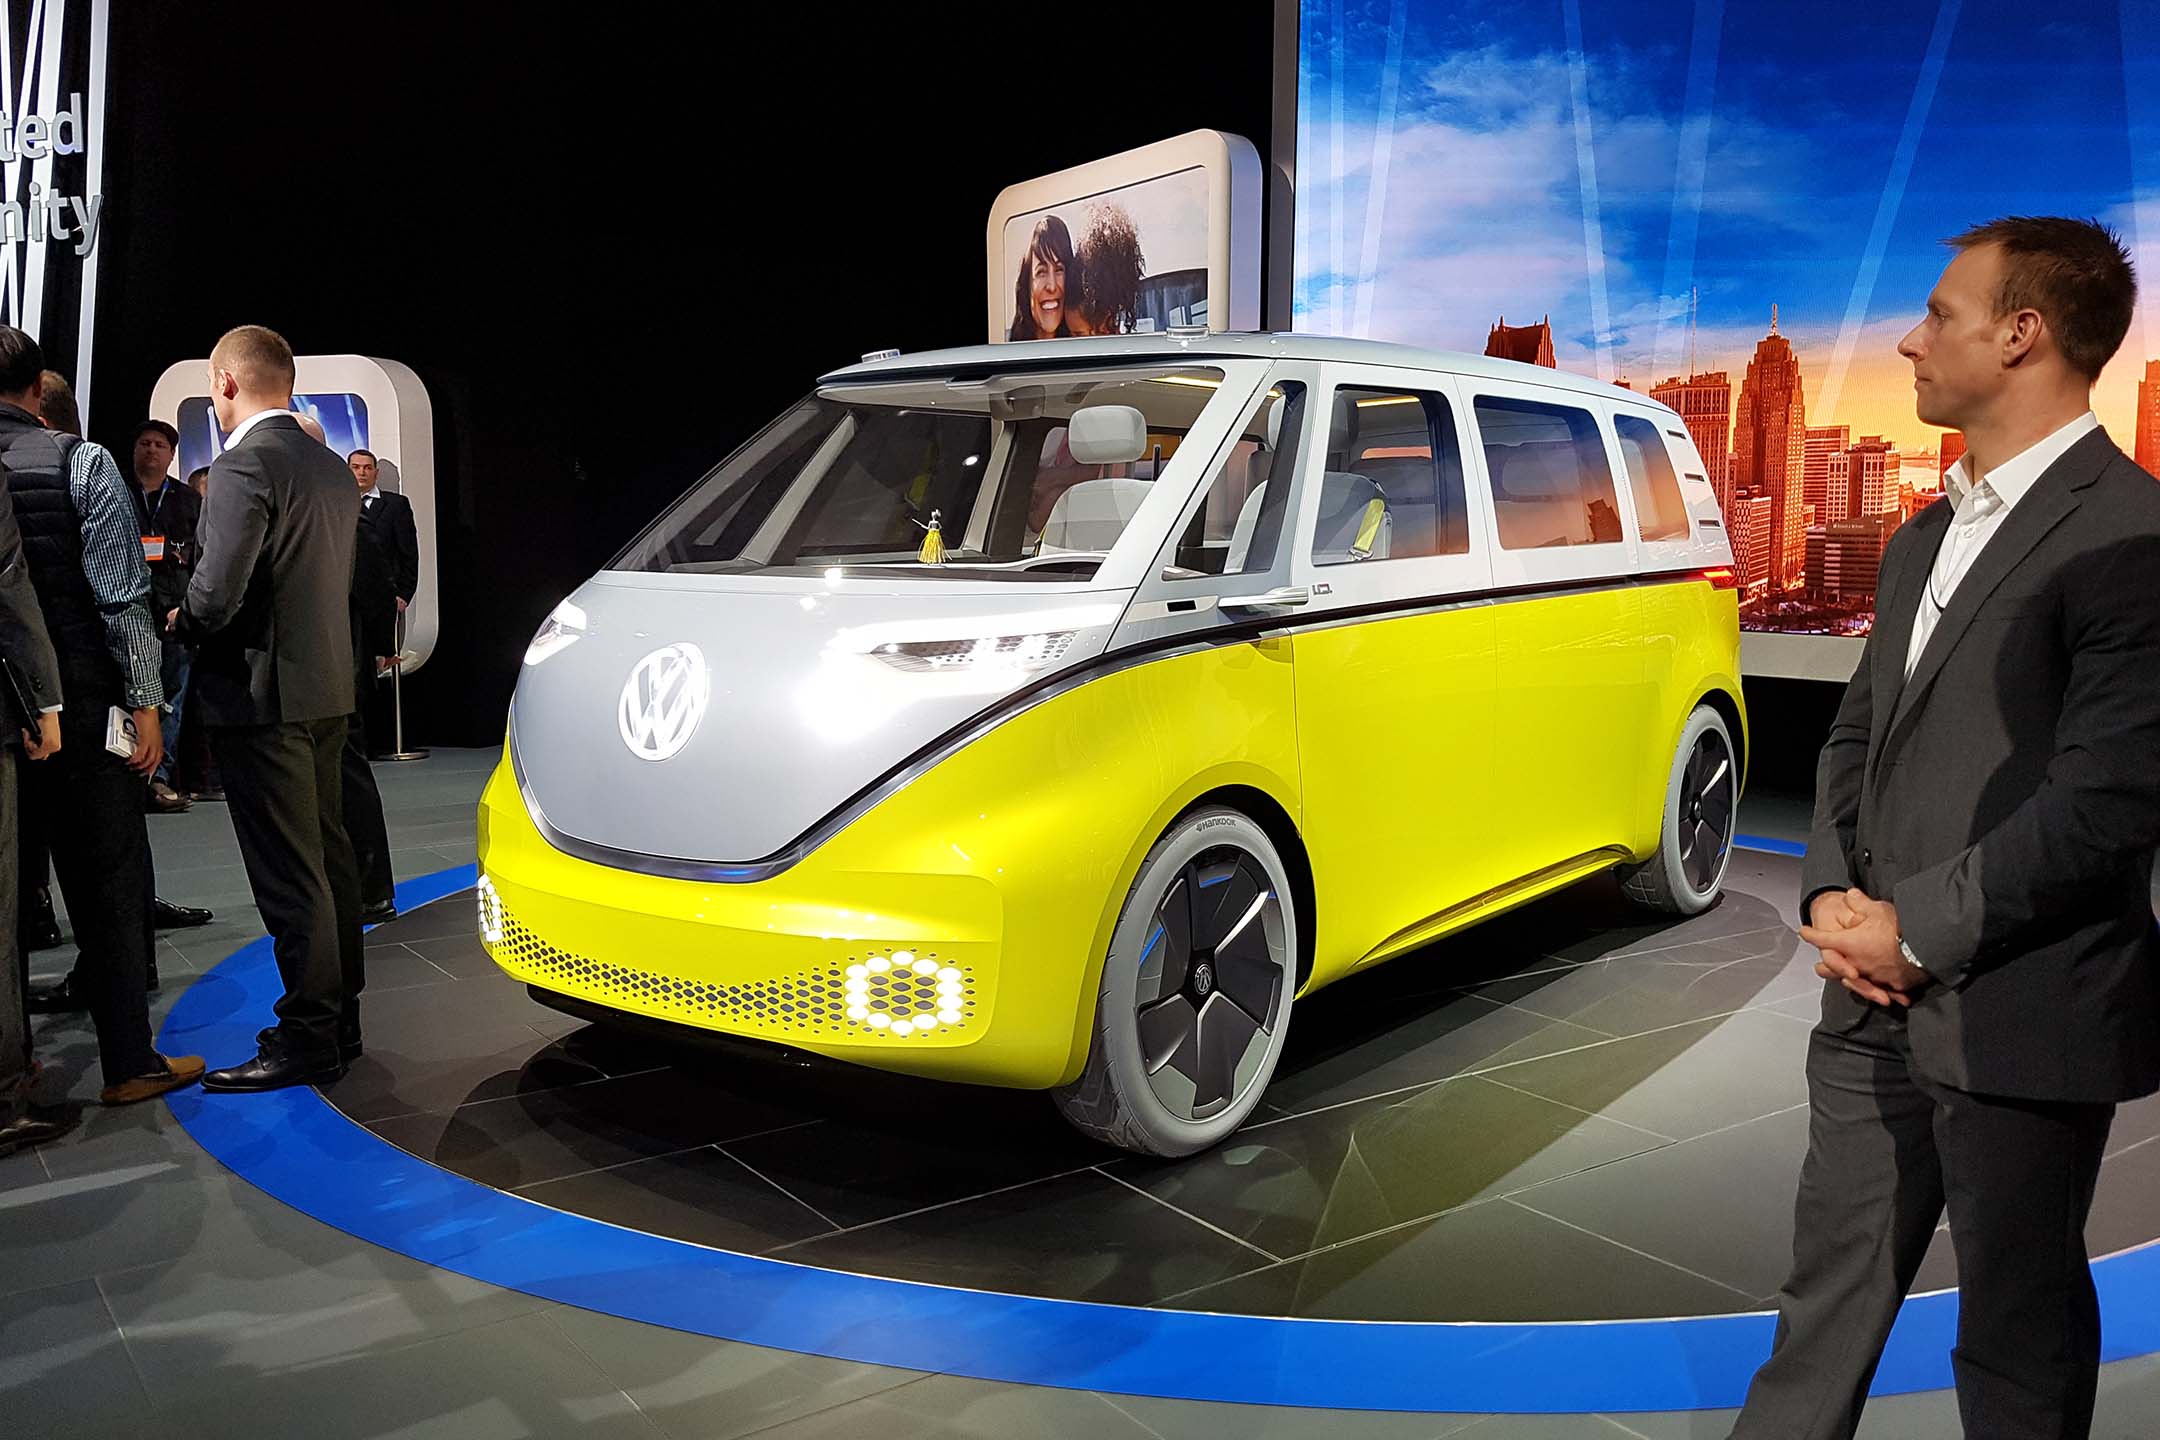 SW: If electrification is what it takes to give the world the return of the VW Microbus, I’m all for it. The bopping hula girl on the dash of the concept says it all: the party wagon is back in a big (and modern) way!